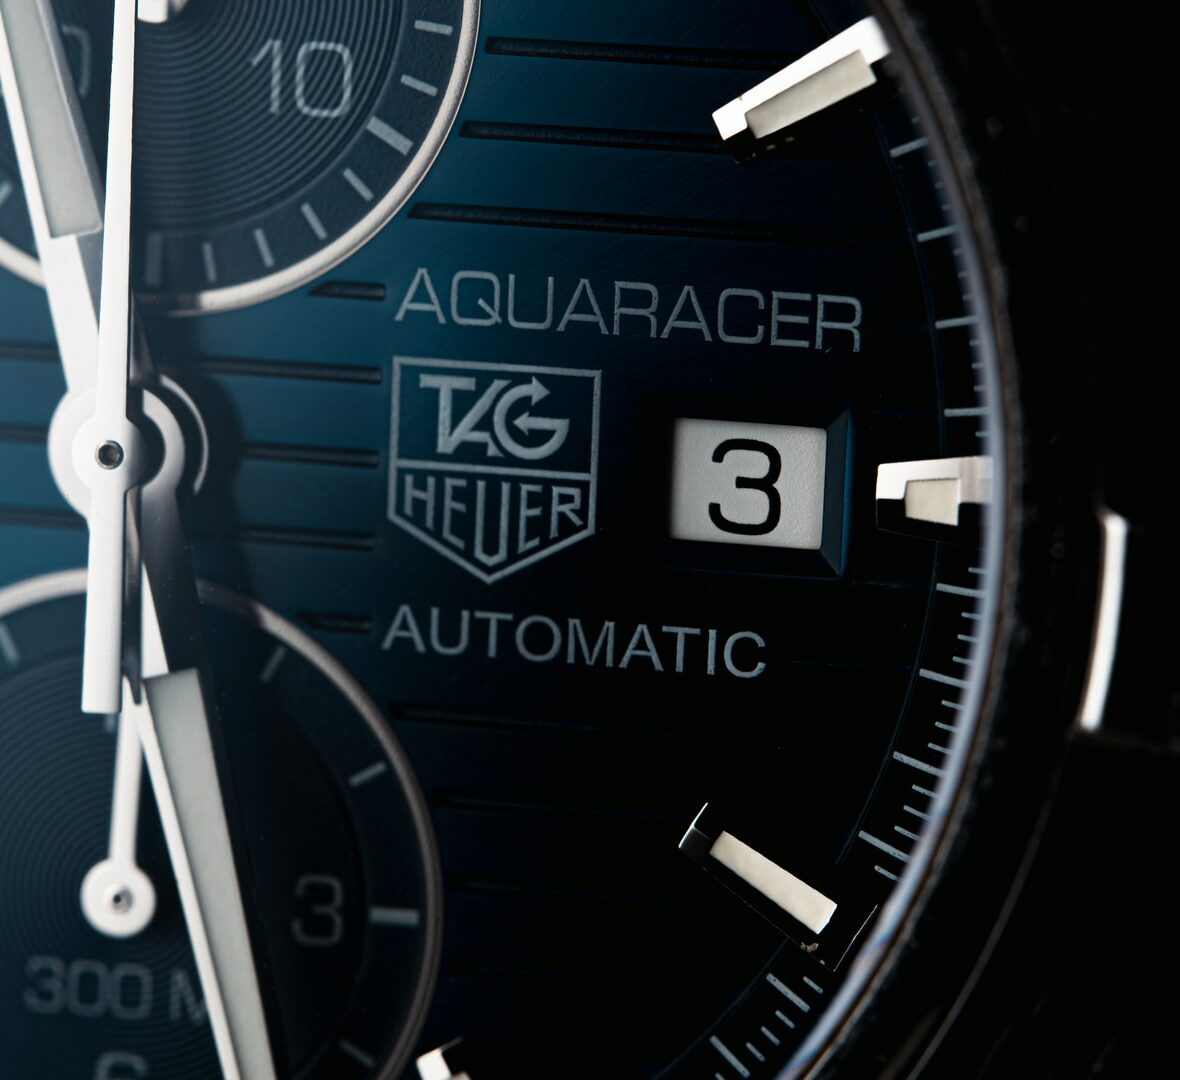 10 of the most popular Tag Heuer watches